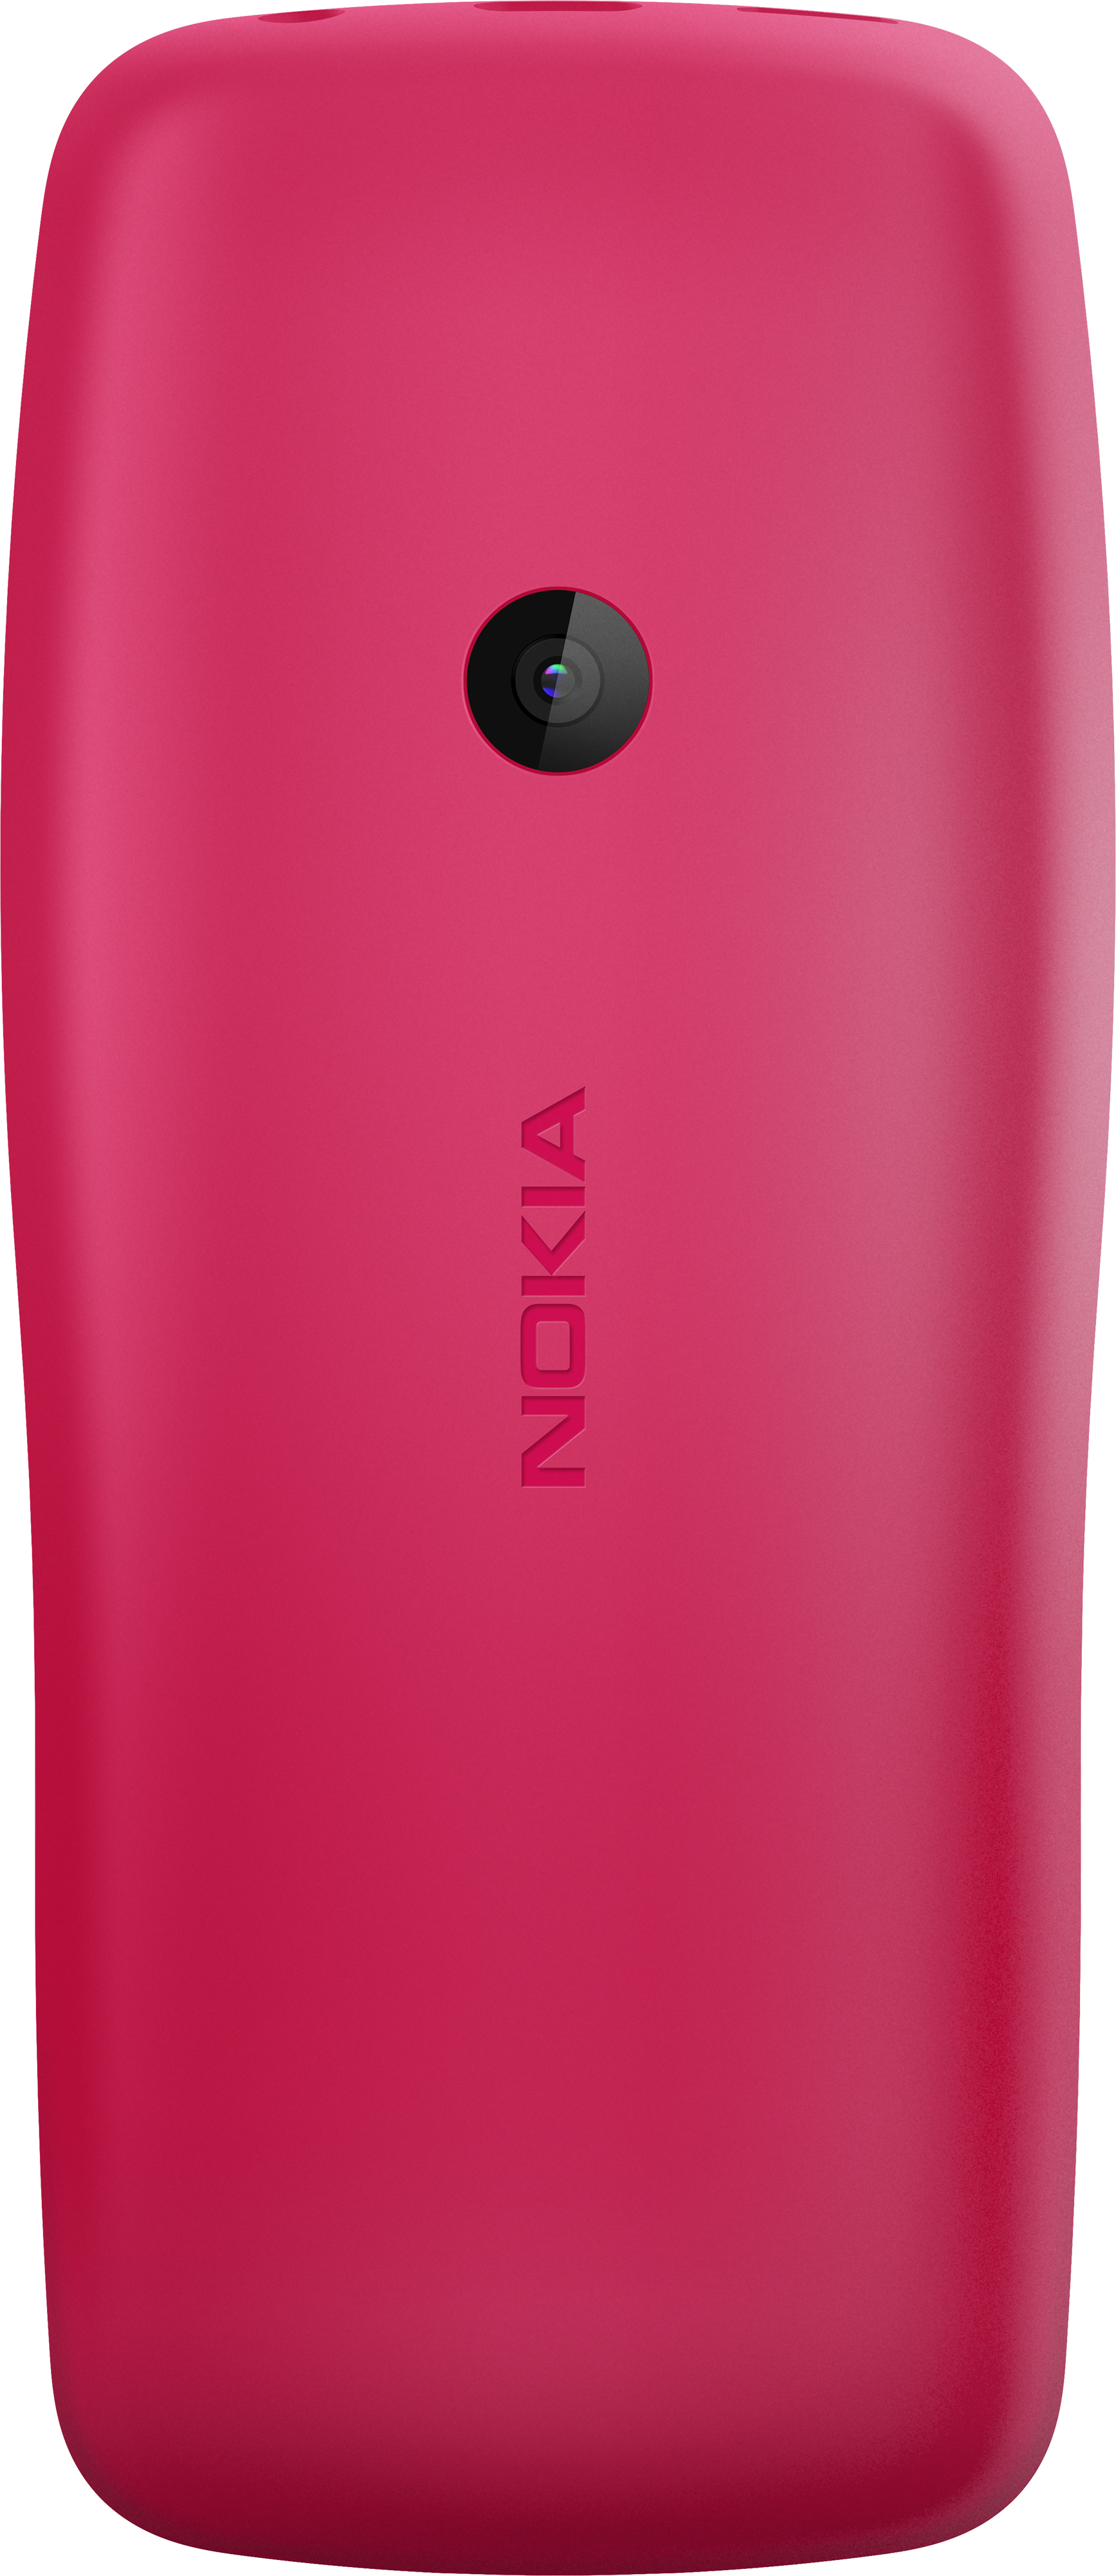 The Latest Nokia Android Smartphones And Mobile Phones